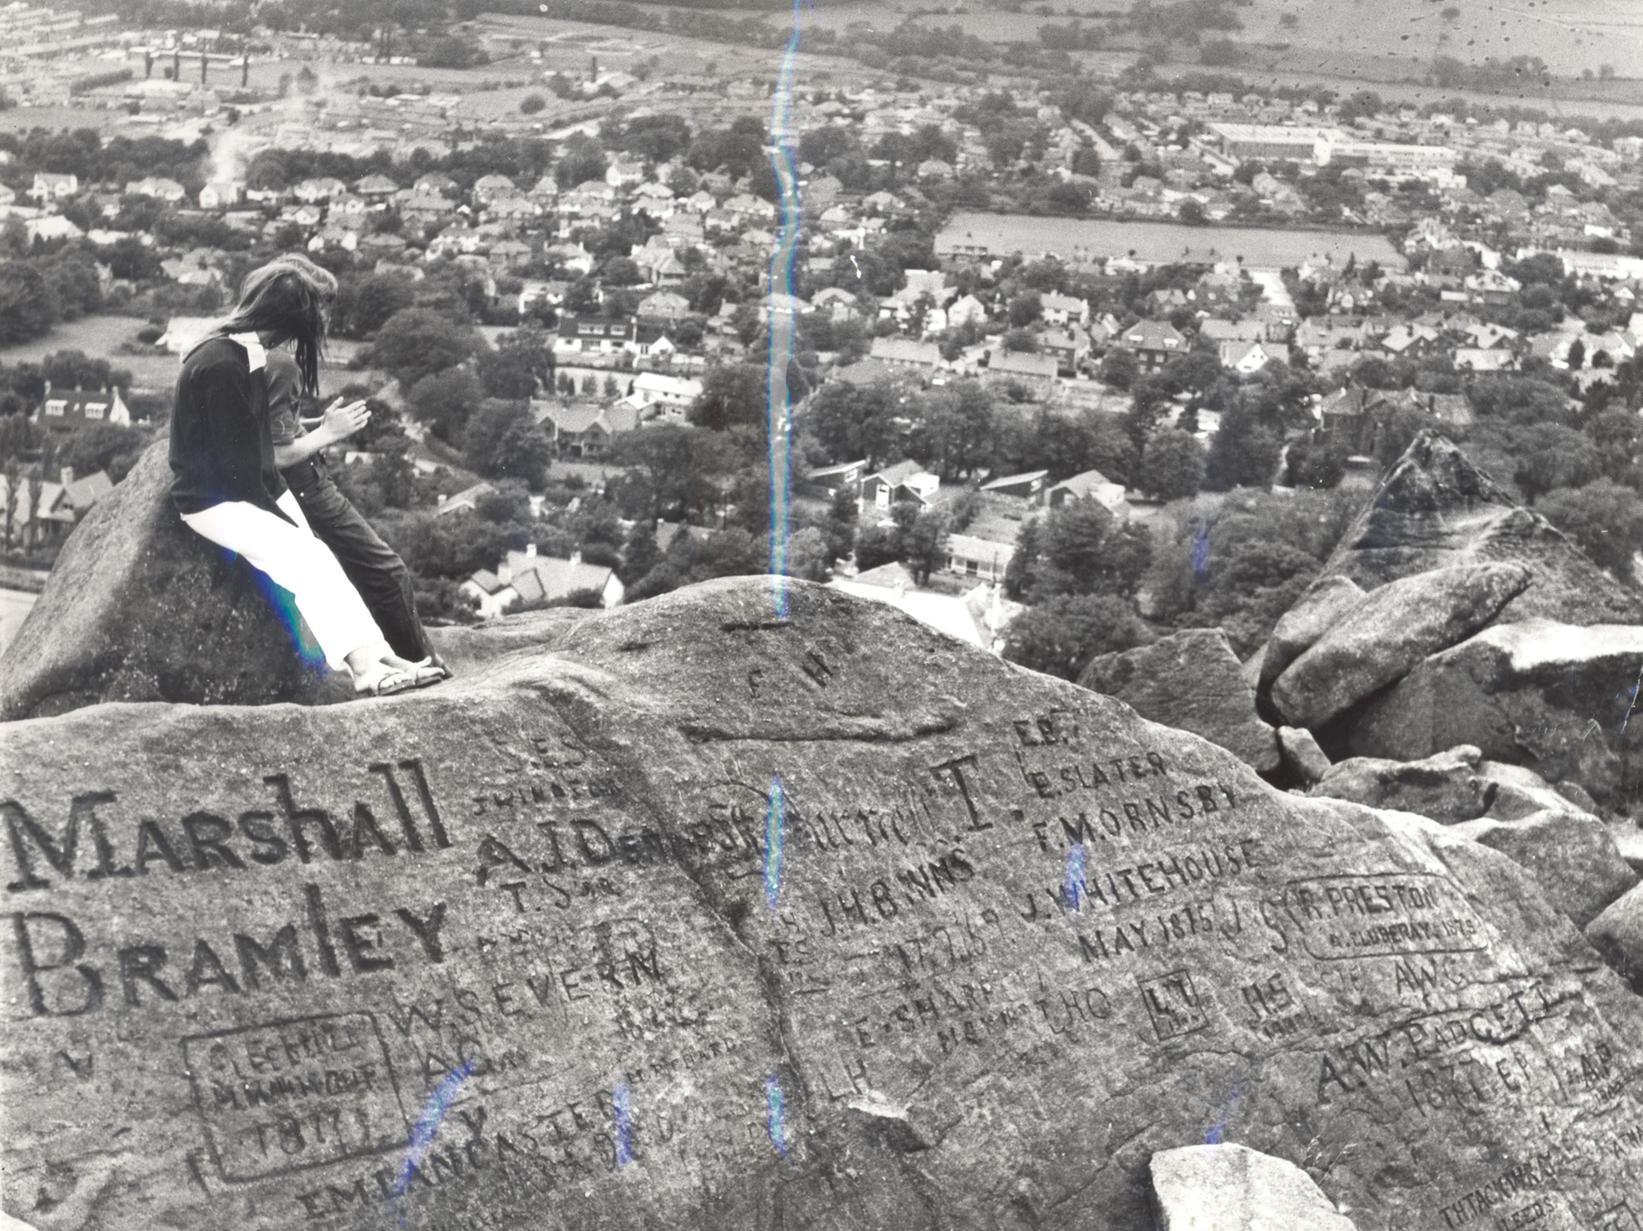 This photo was taken at the Cow and Calf rocks showing a panoramic view of Ilkley. In the foreground are a few of the names carved in the rocks.